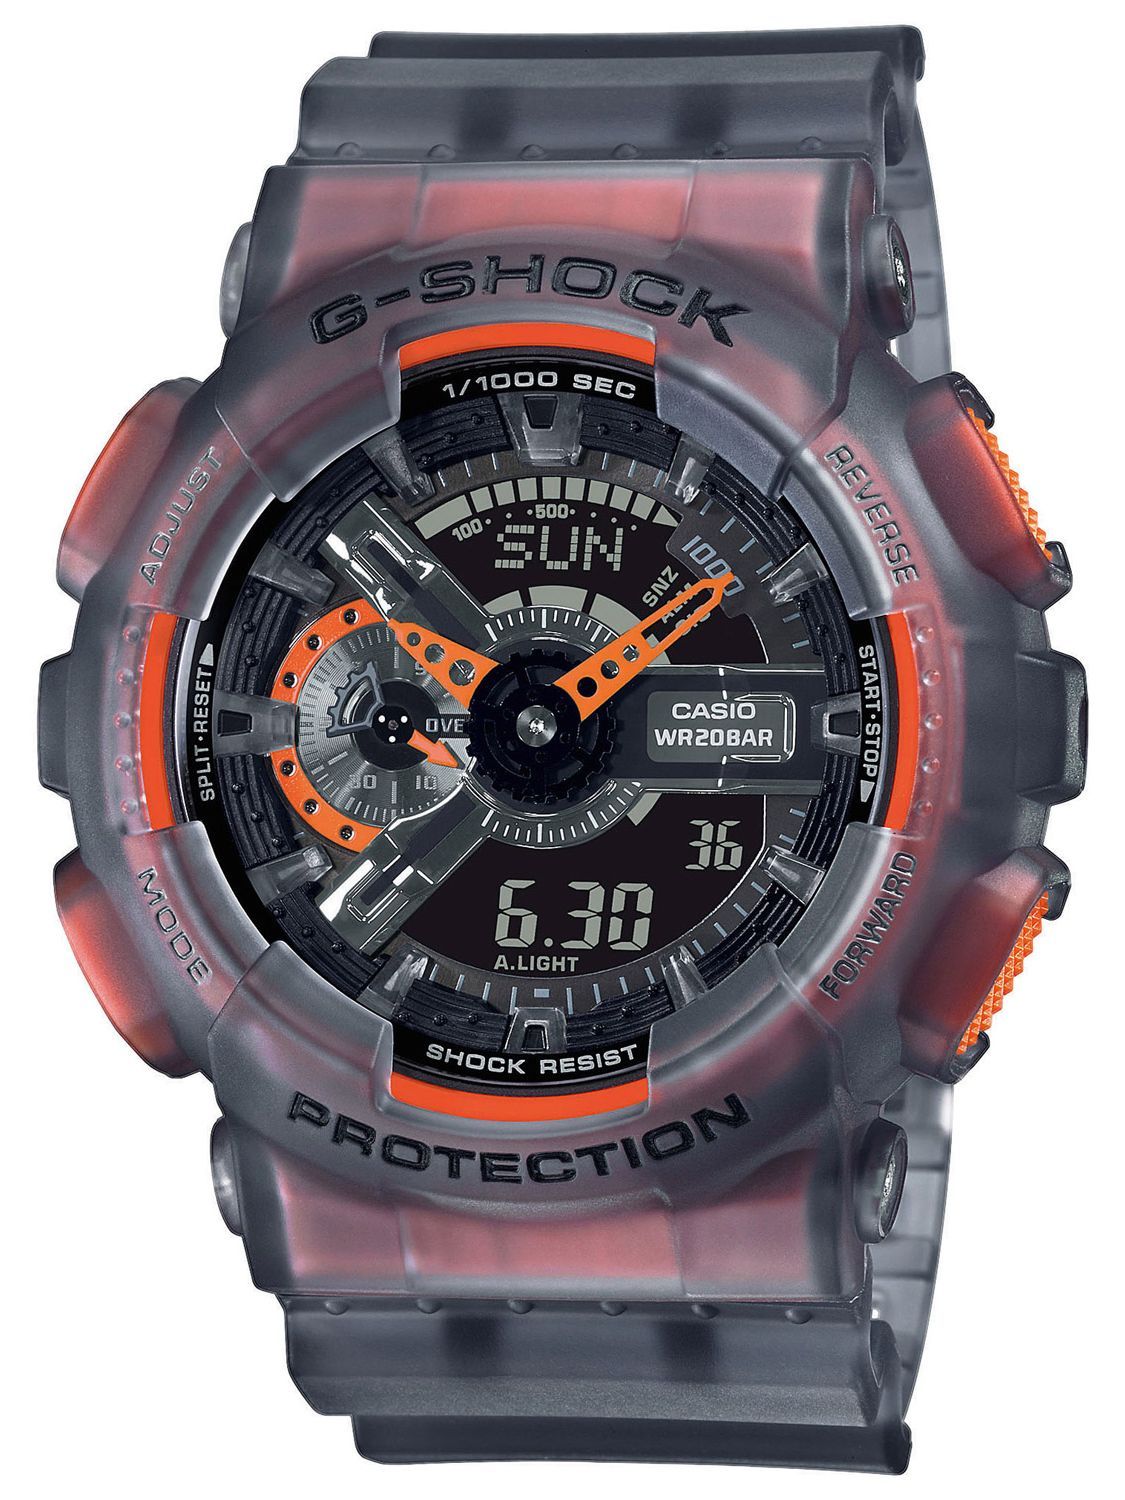 This Casio G-shock Analogue-Digital Watch for Men is the perfect timepiece to wear or to gift. It's Grey 50 mm Round case combined with the comfortable Grey Plastic will ensure you enjoy this stunning timepiece without any compromise. Operated by a high quality Quartz movement and water resistant to 20 bars, your watch will keep ticking. This sporty and fashionable watch gives you a unique feeling in every outfit! -The watch has a calendar function: Day-Date, Stop Watch, Worldtime, Timer, Alarm, Light High quality 19 cm length, 28 mm wide, Grey Plastic strap with a Buckle Case Diameter: 50 mm, Case height: 15 mm and Case color: Grey Dial color: Black